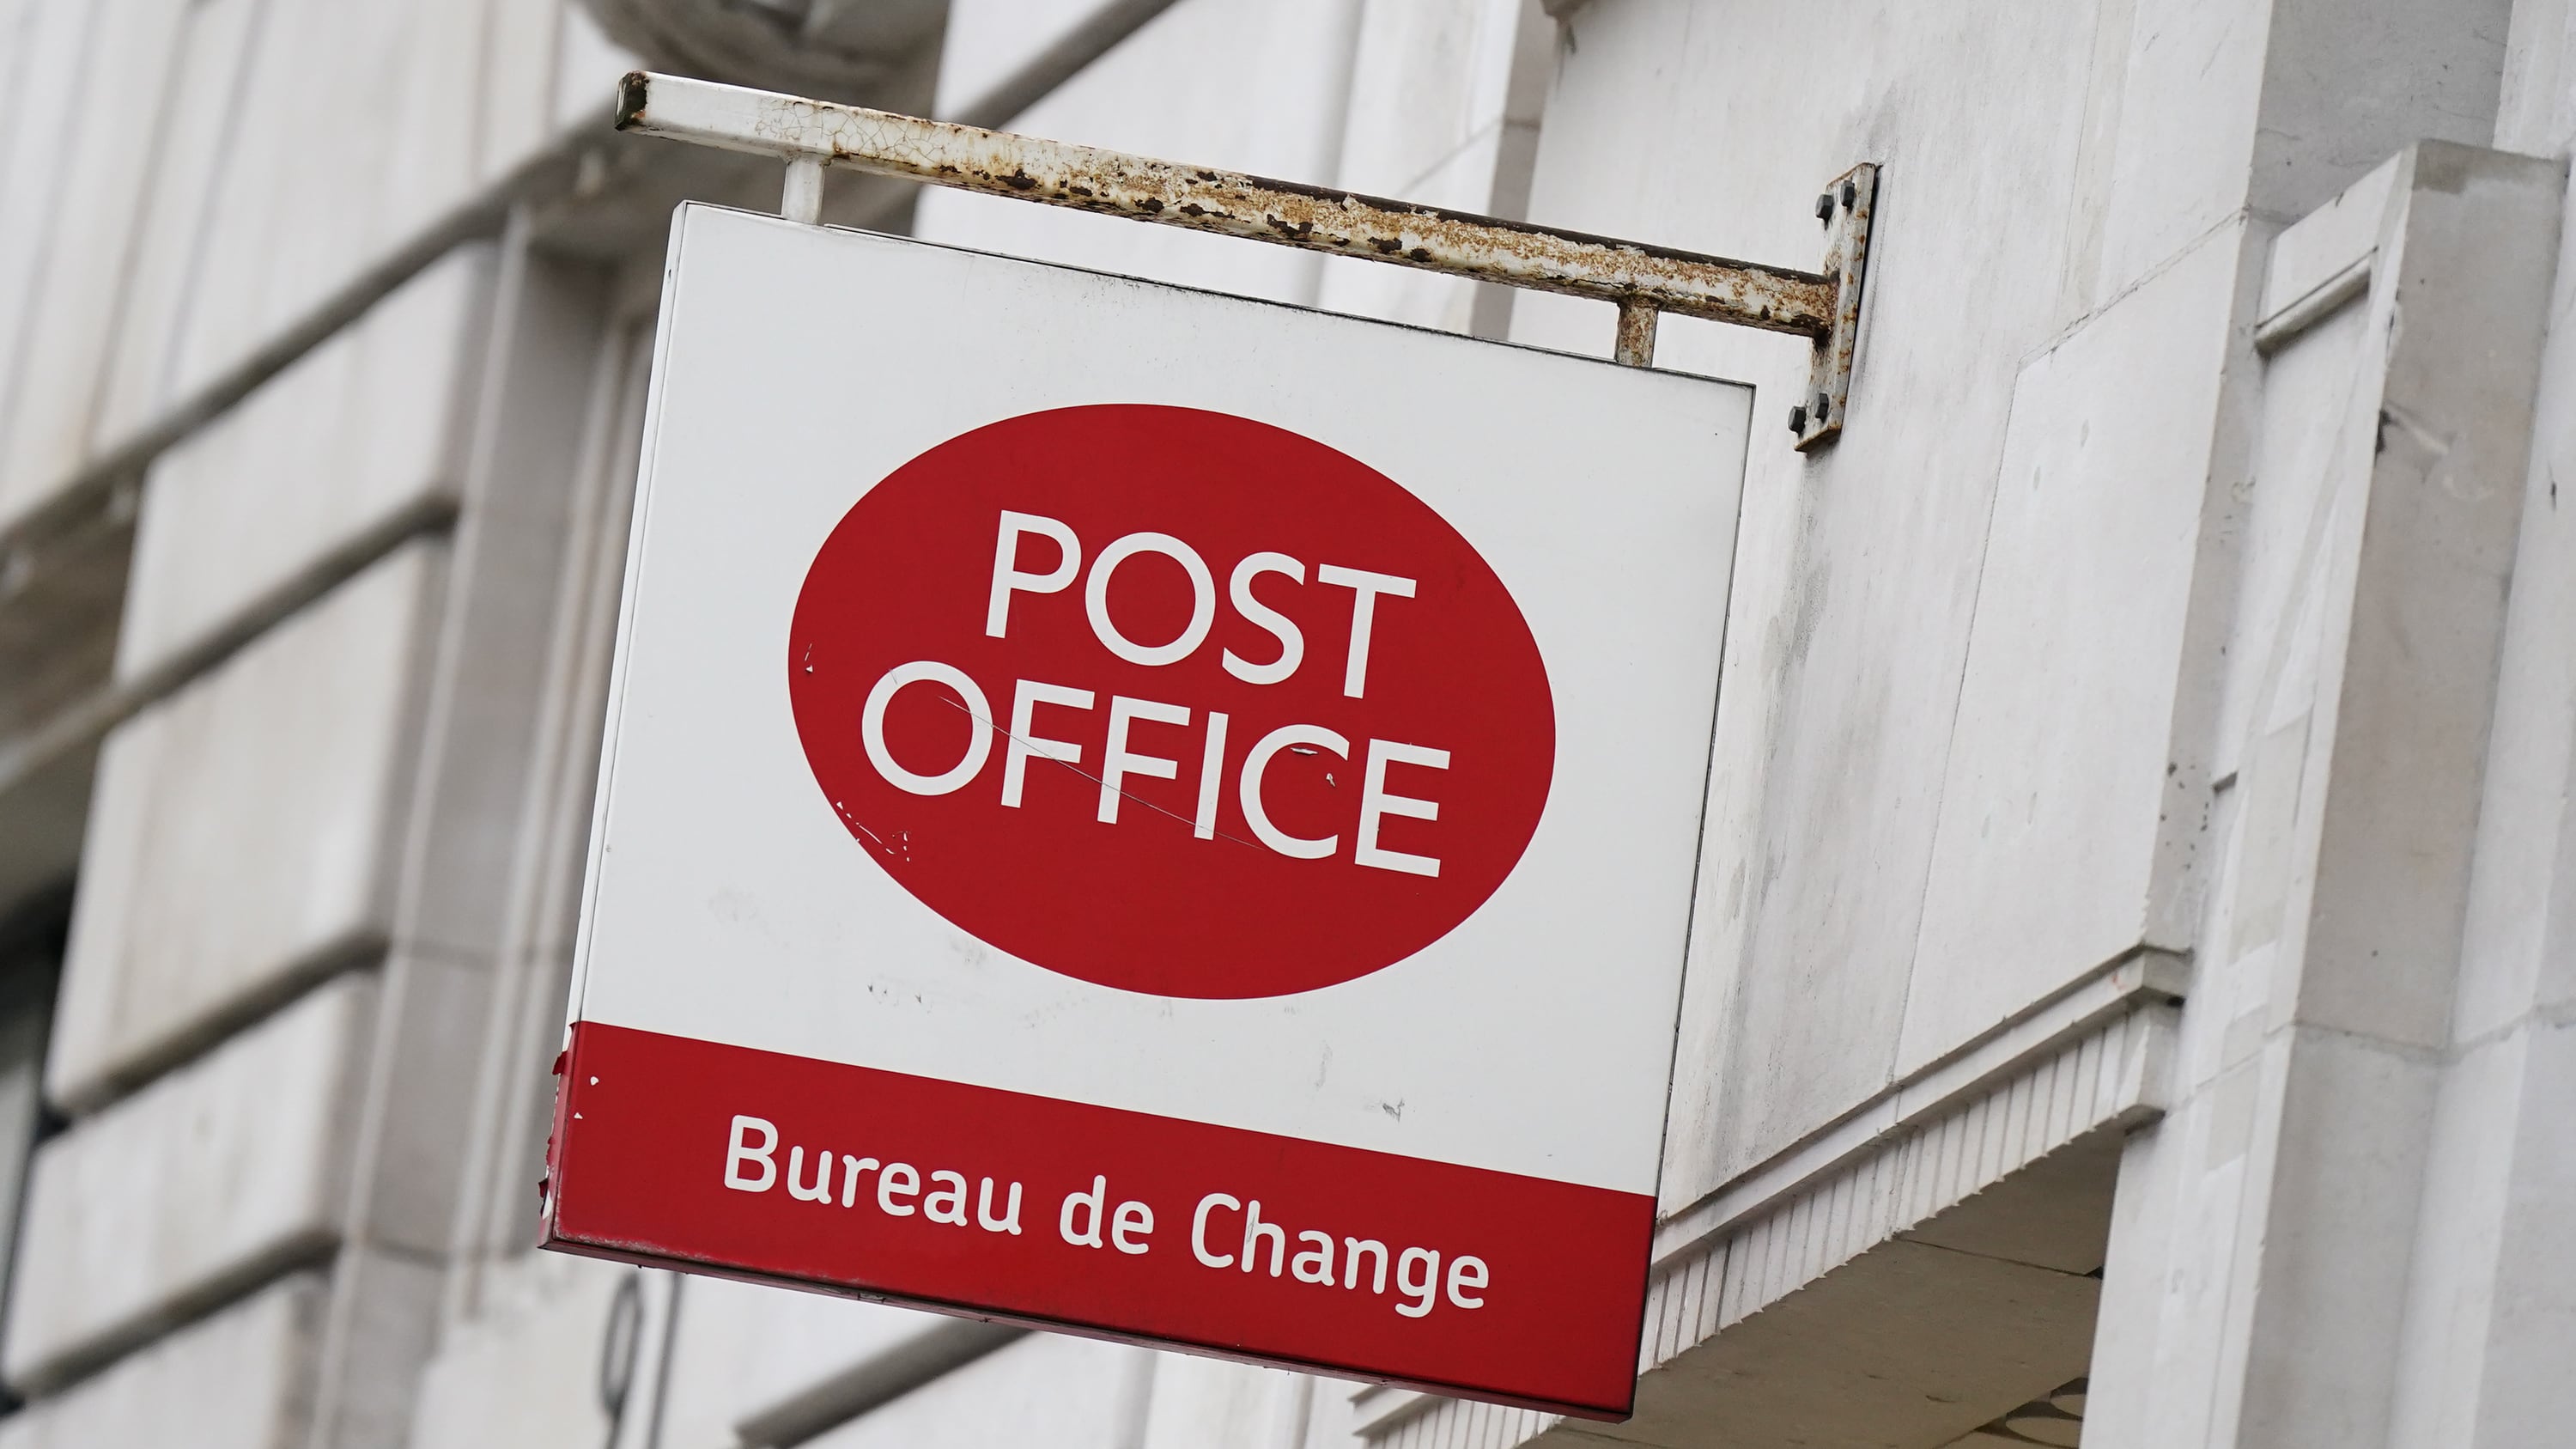 More than 700 subpostmasters were prosecuted by the Post Office and handed criminal convictions between 1999 and 2015